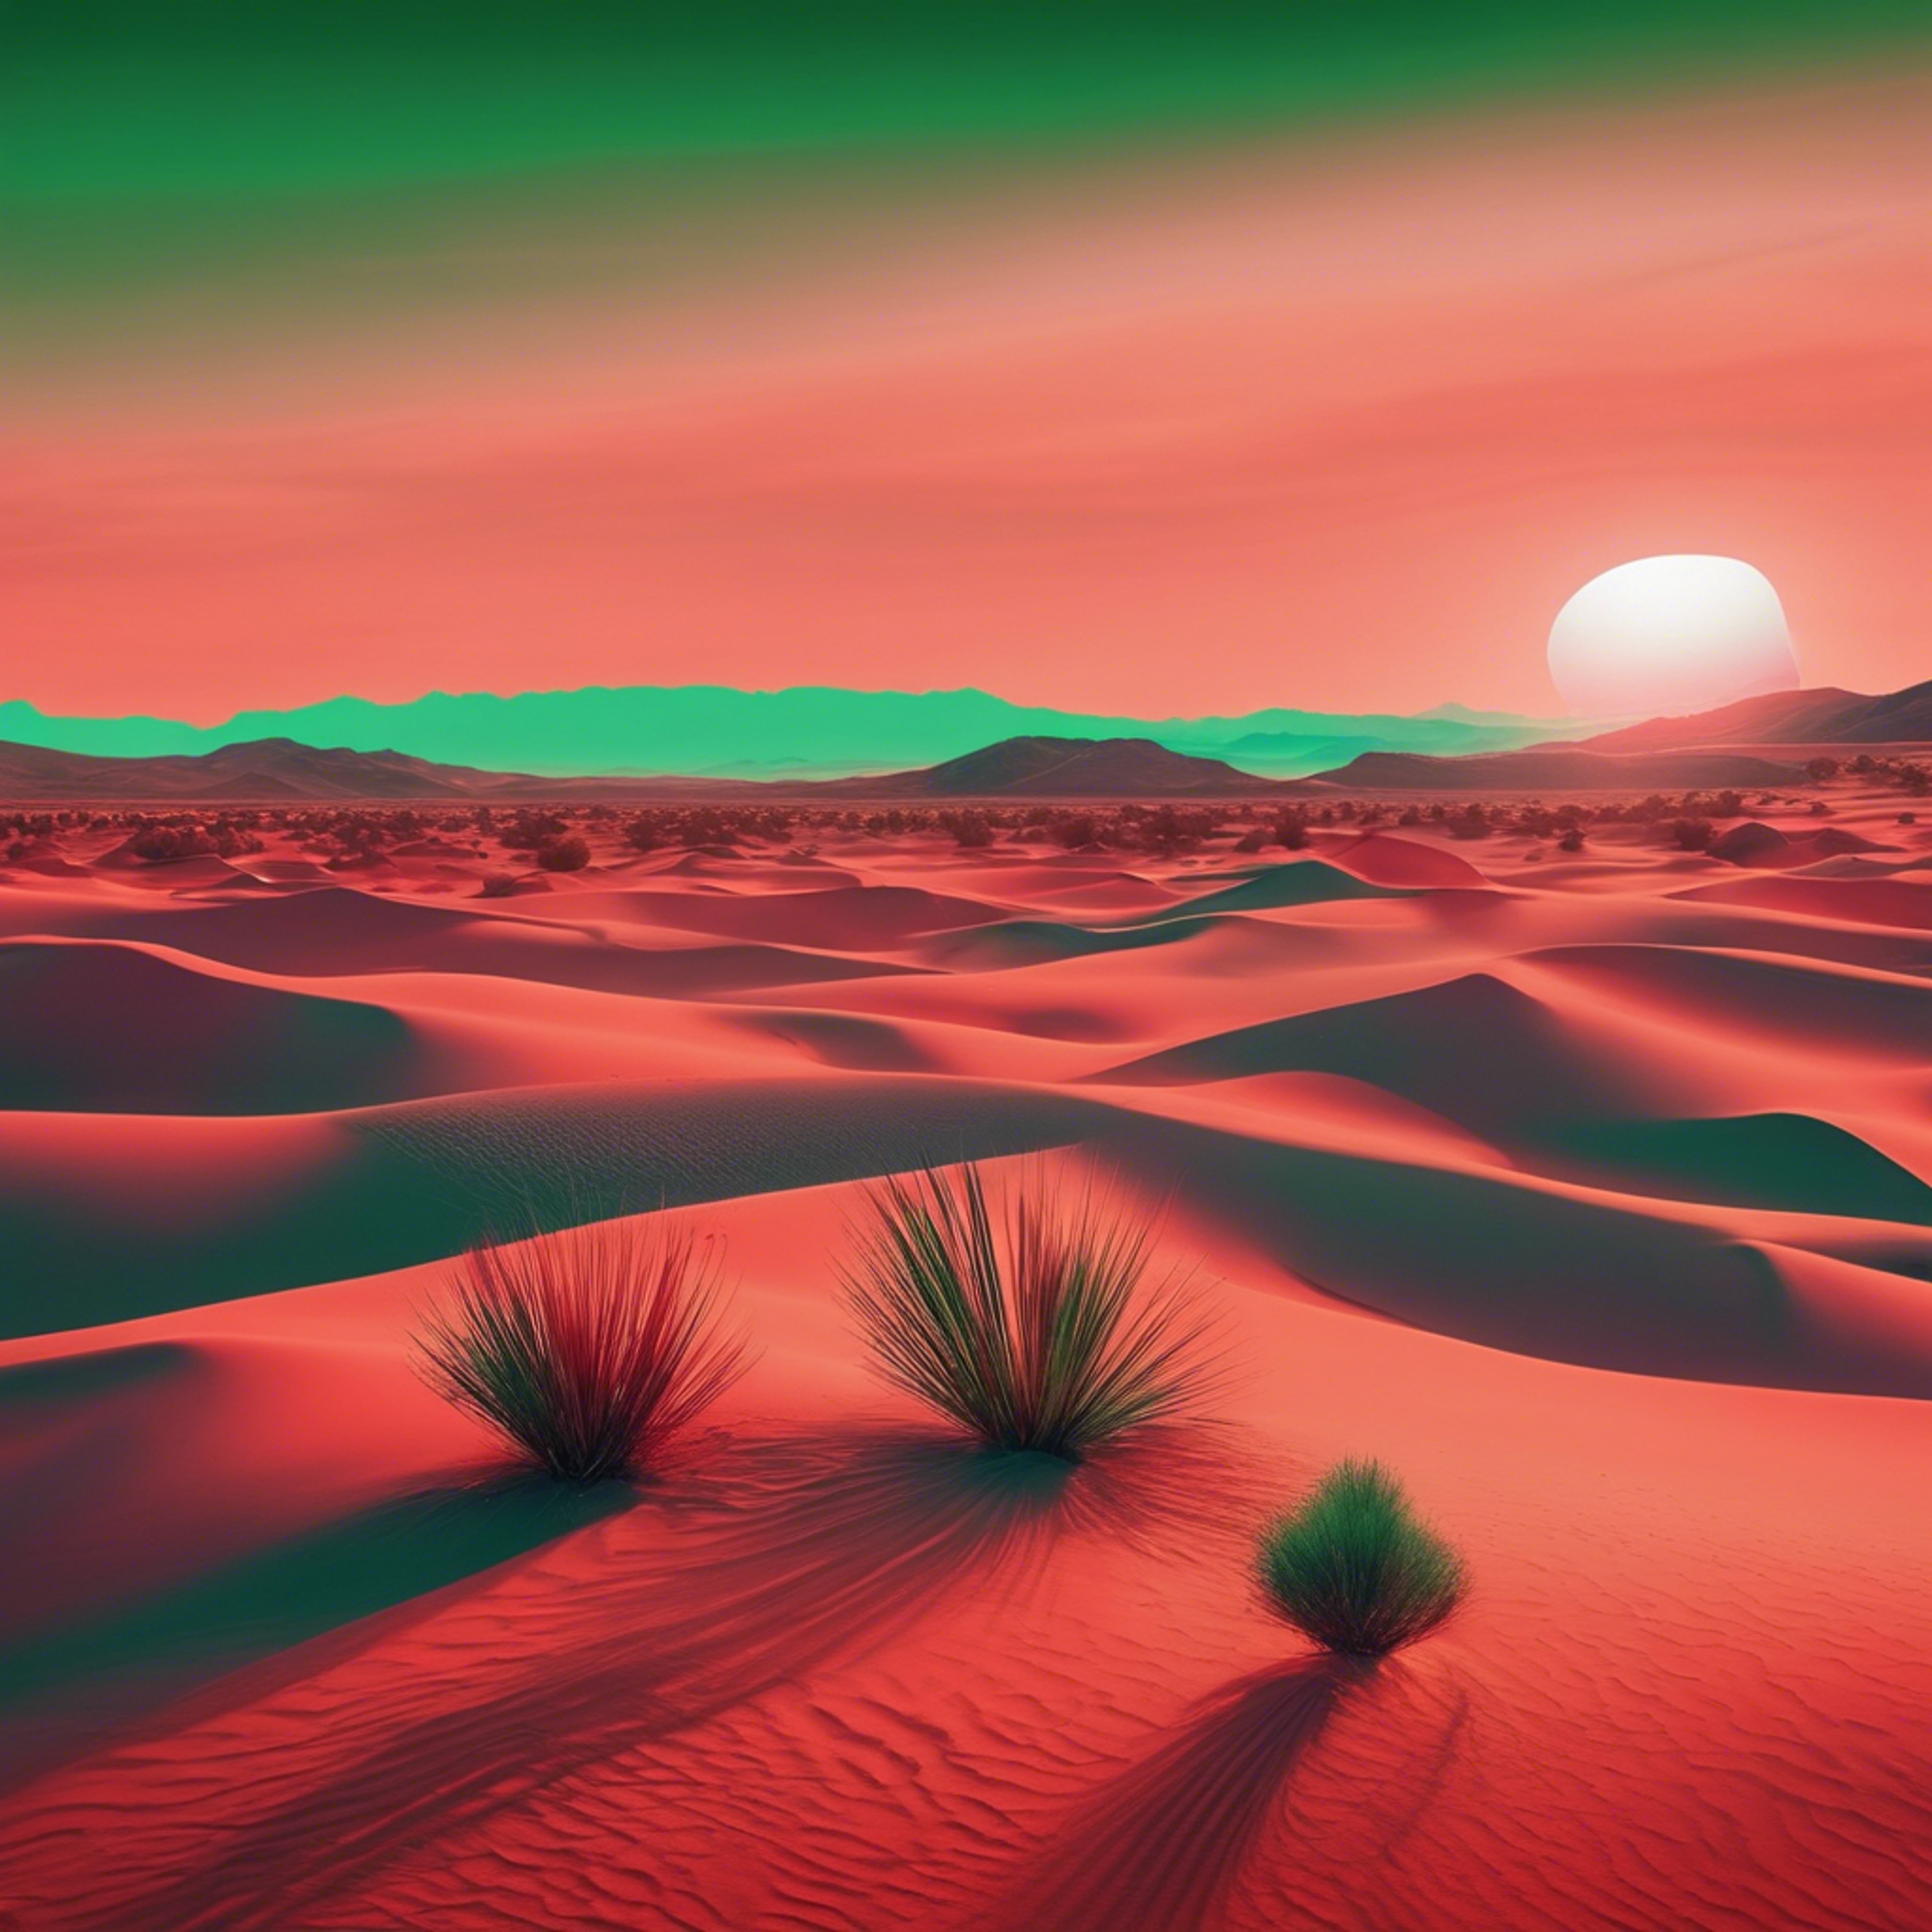 Abstract mirage in red and green, reminiscent of a modern artist's take on a desert sunset Ταπετσαρία[3a4ec3a043b54638a7ad]